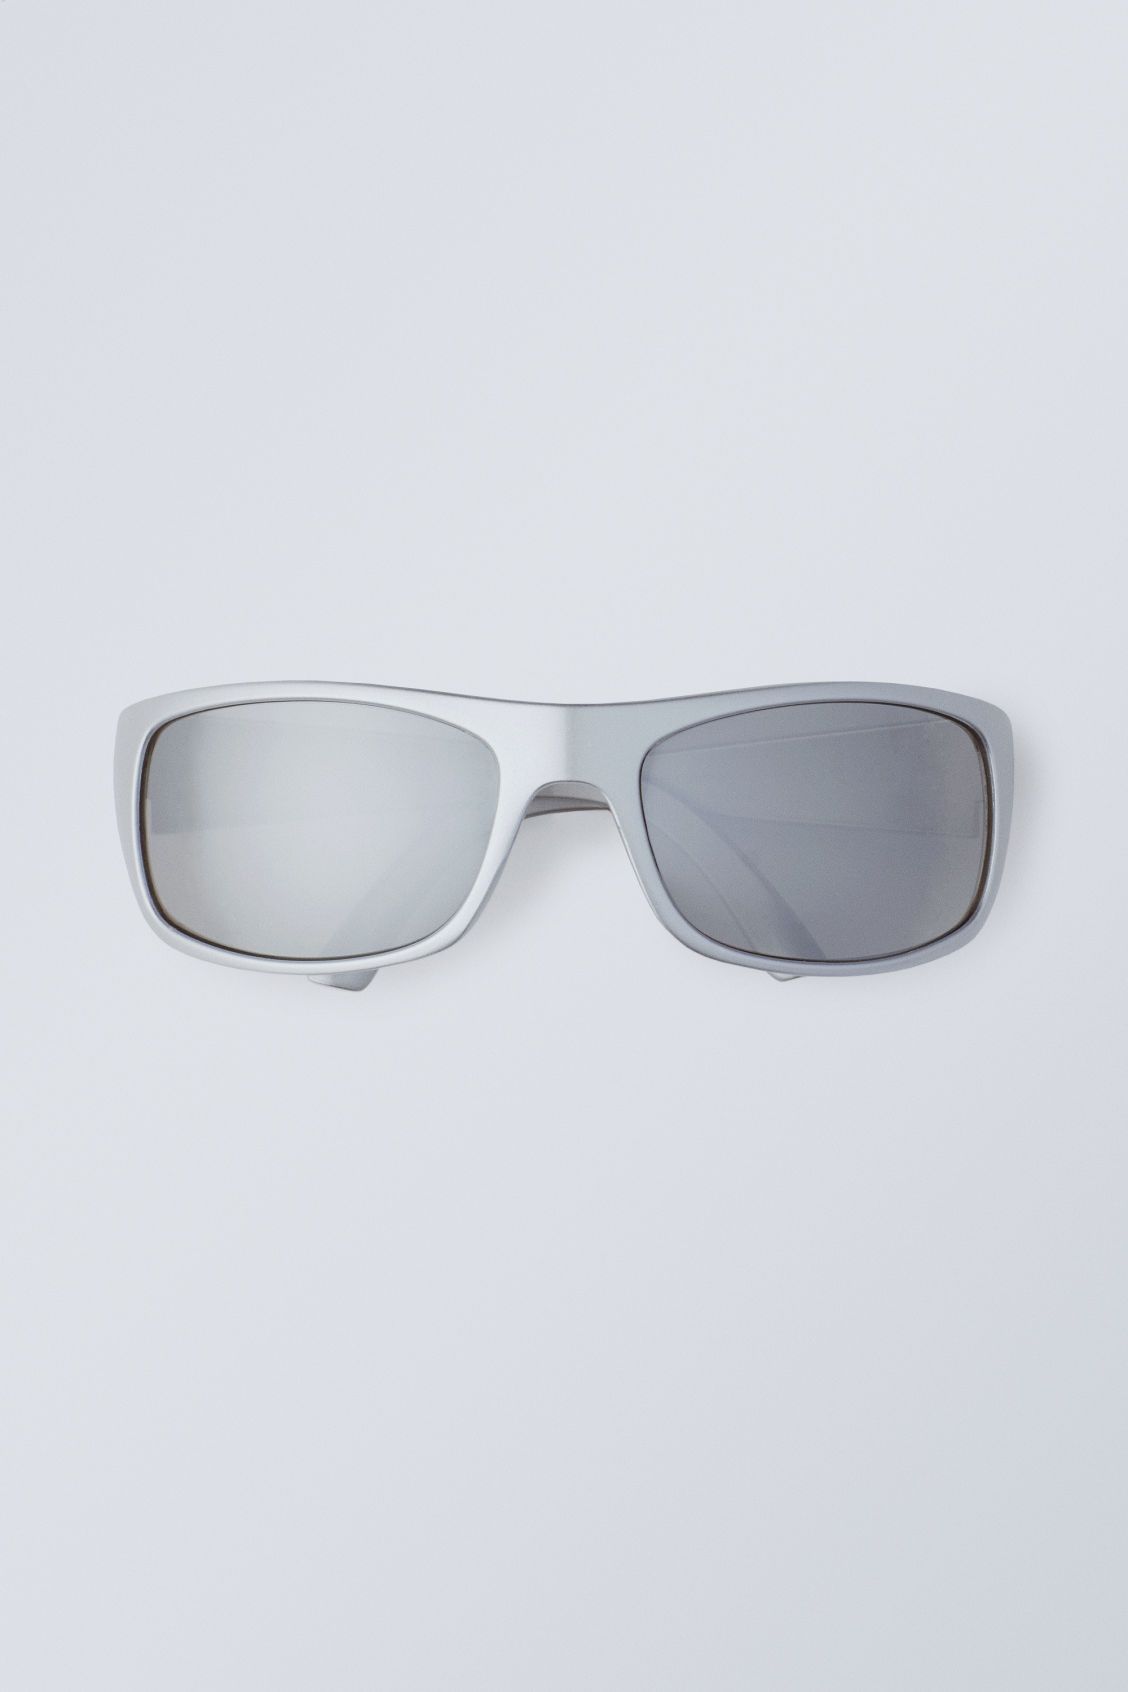 Stay Sunglasses - Silver | Weekday